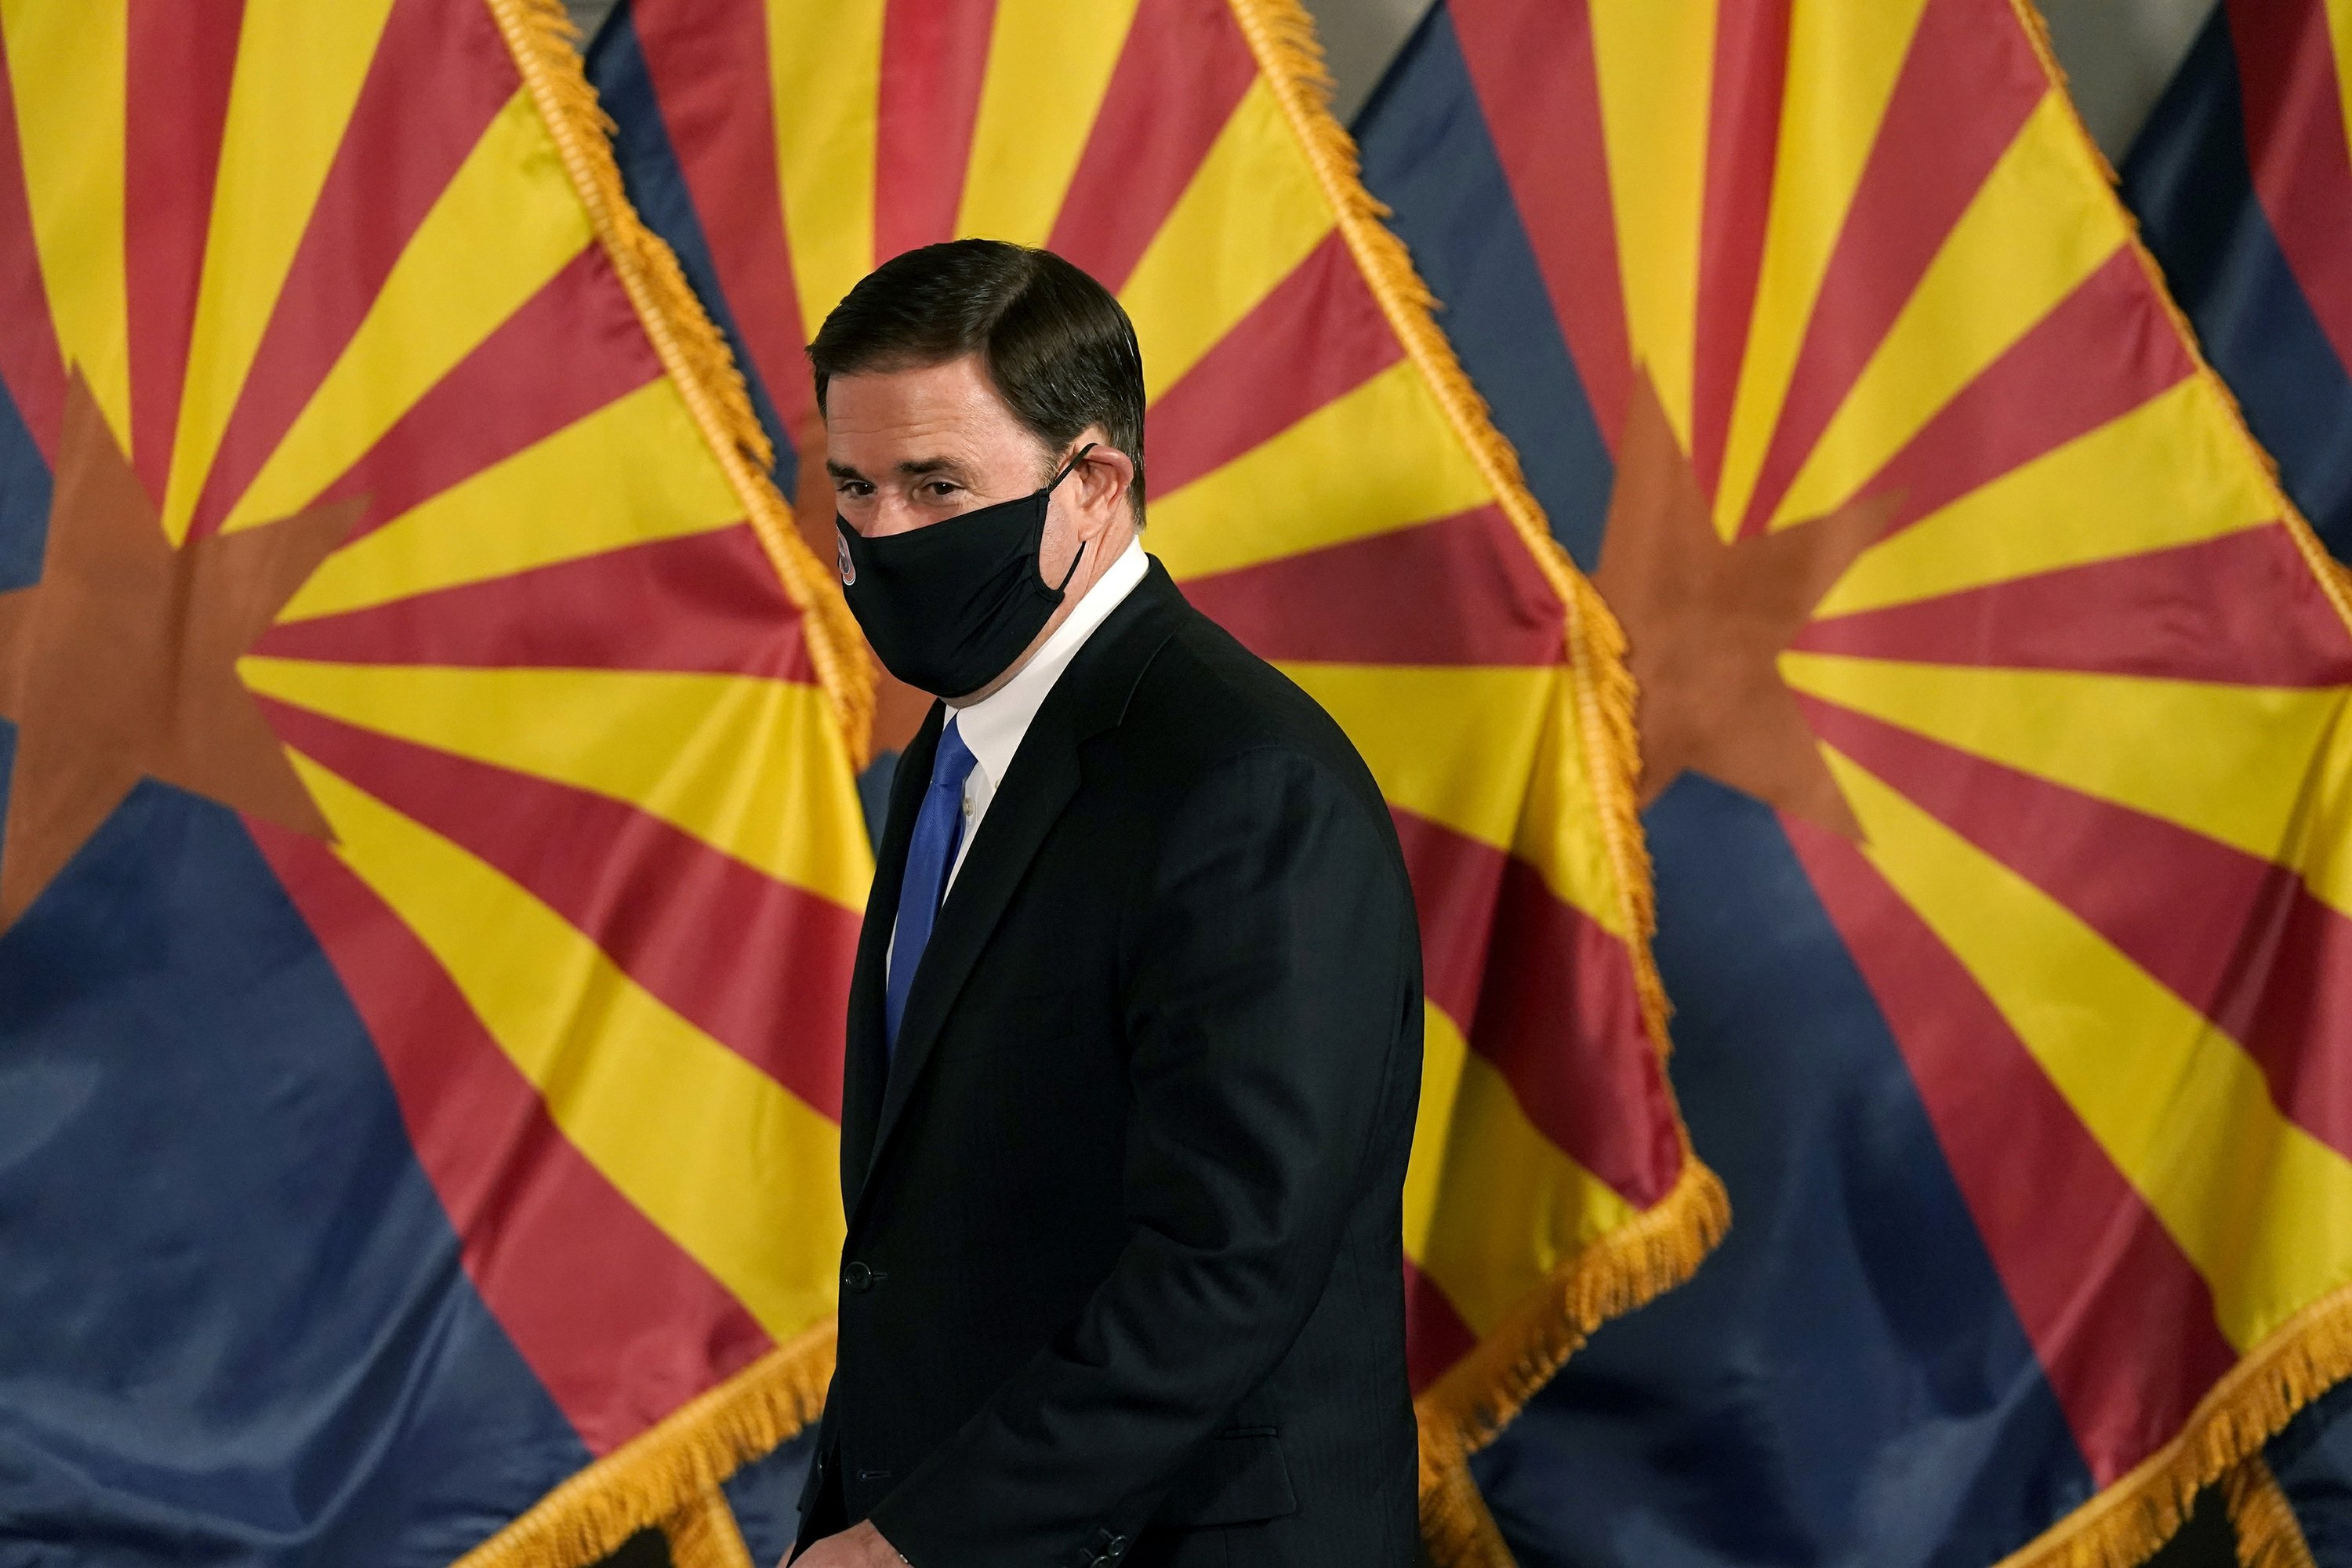 The Arizona governor lifts the mask warrants, reopens the bars